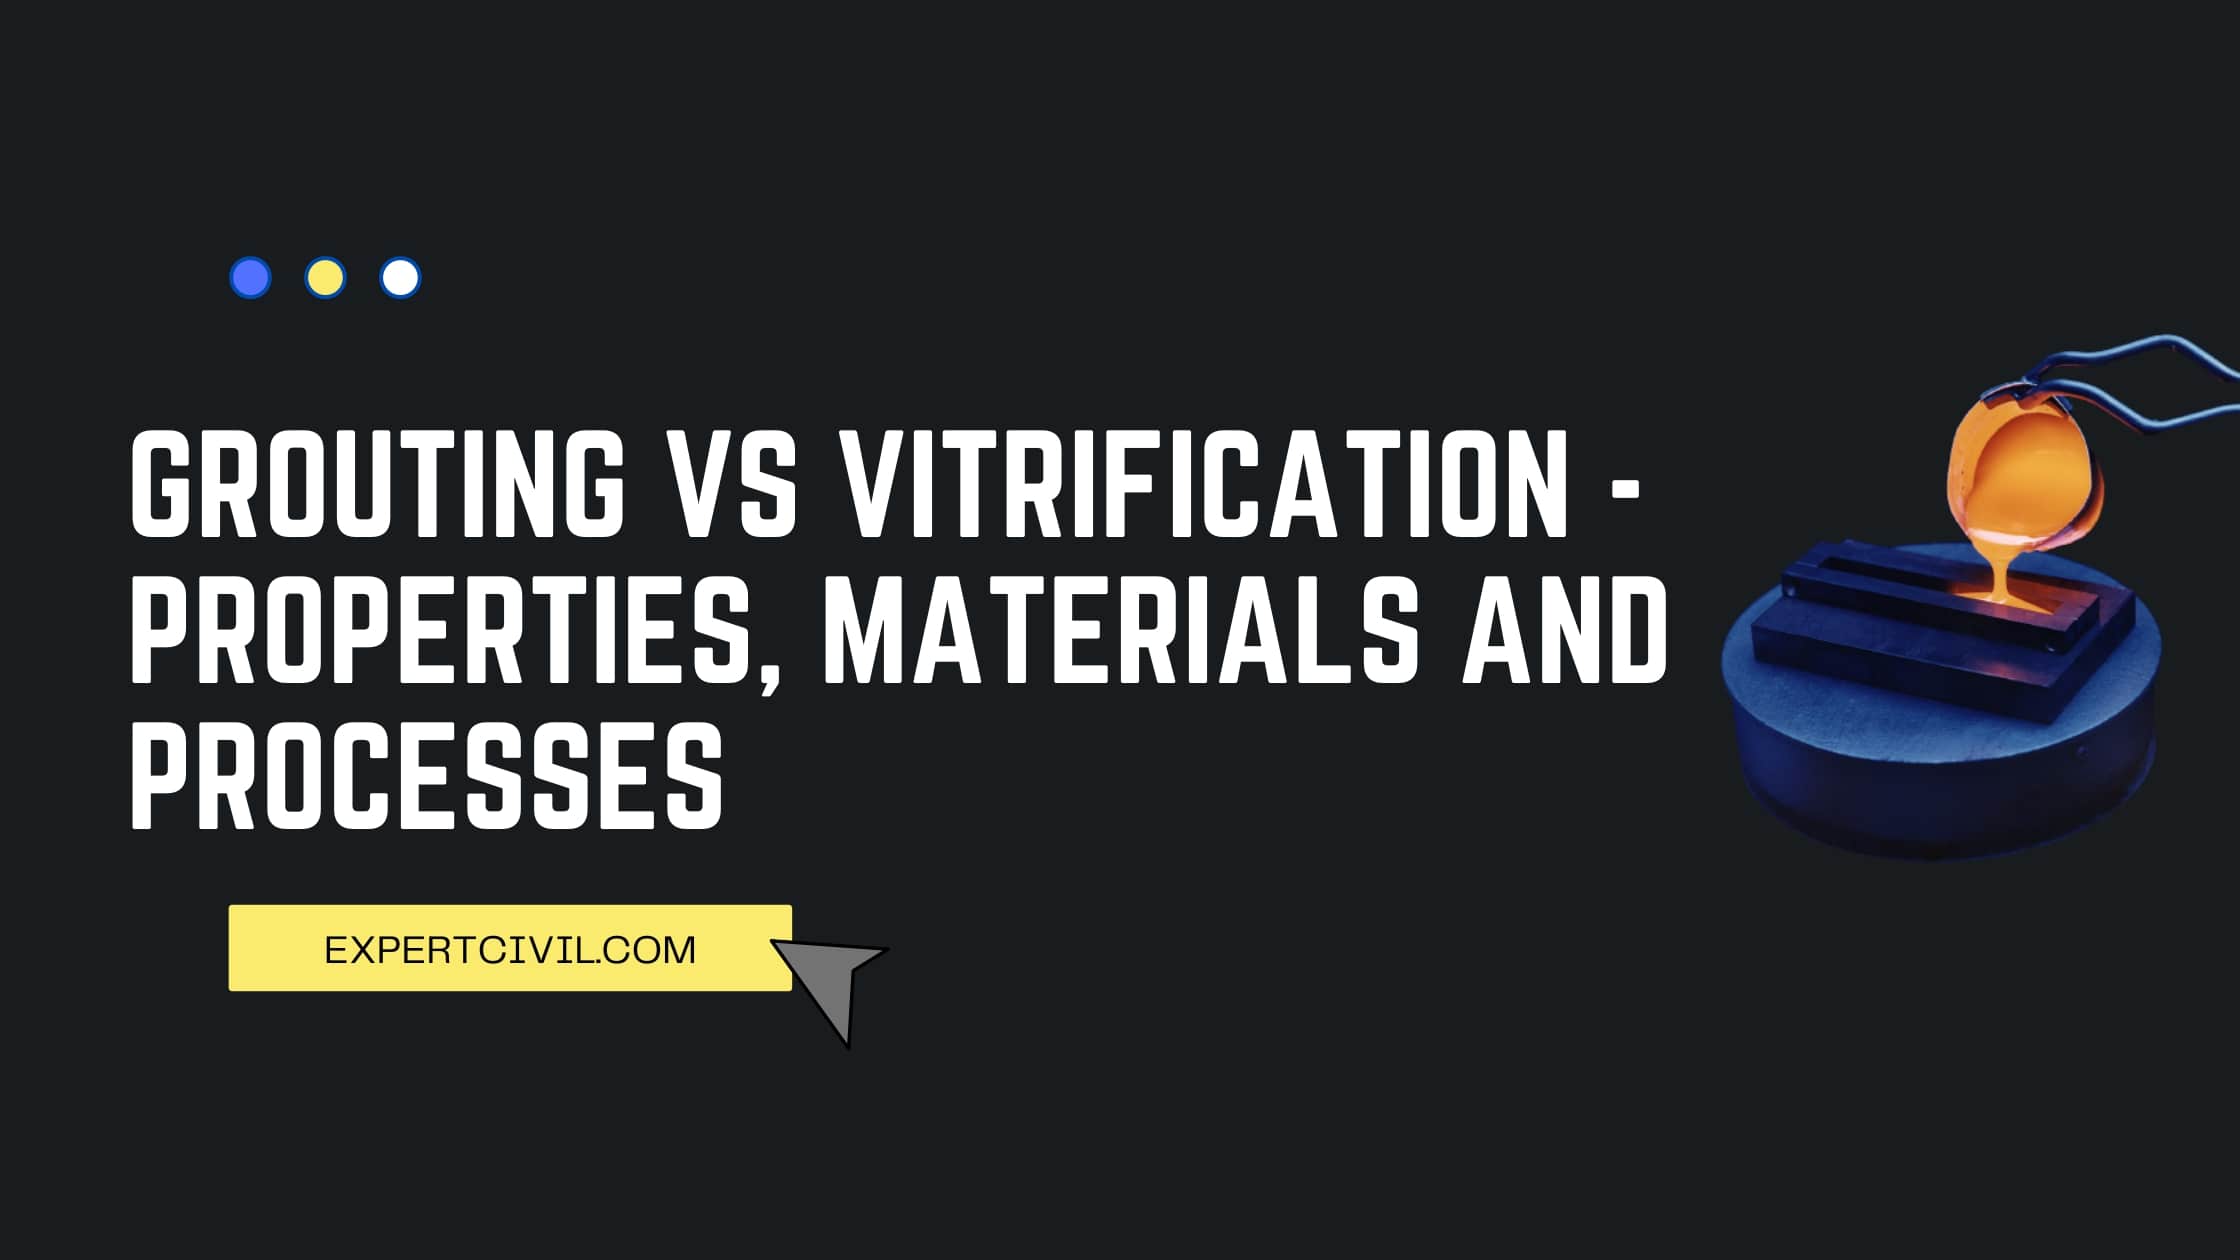 Grouting vs Vitrification – Properties, Materials and Processes